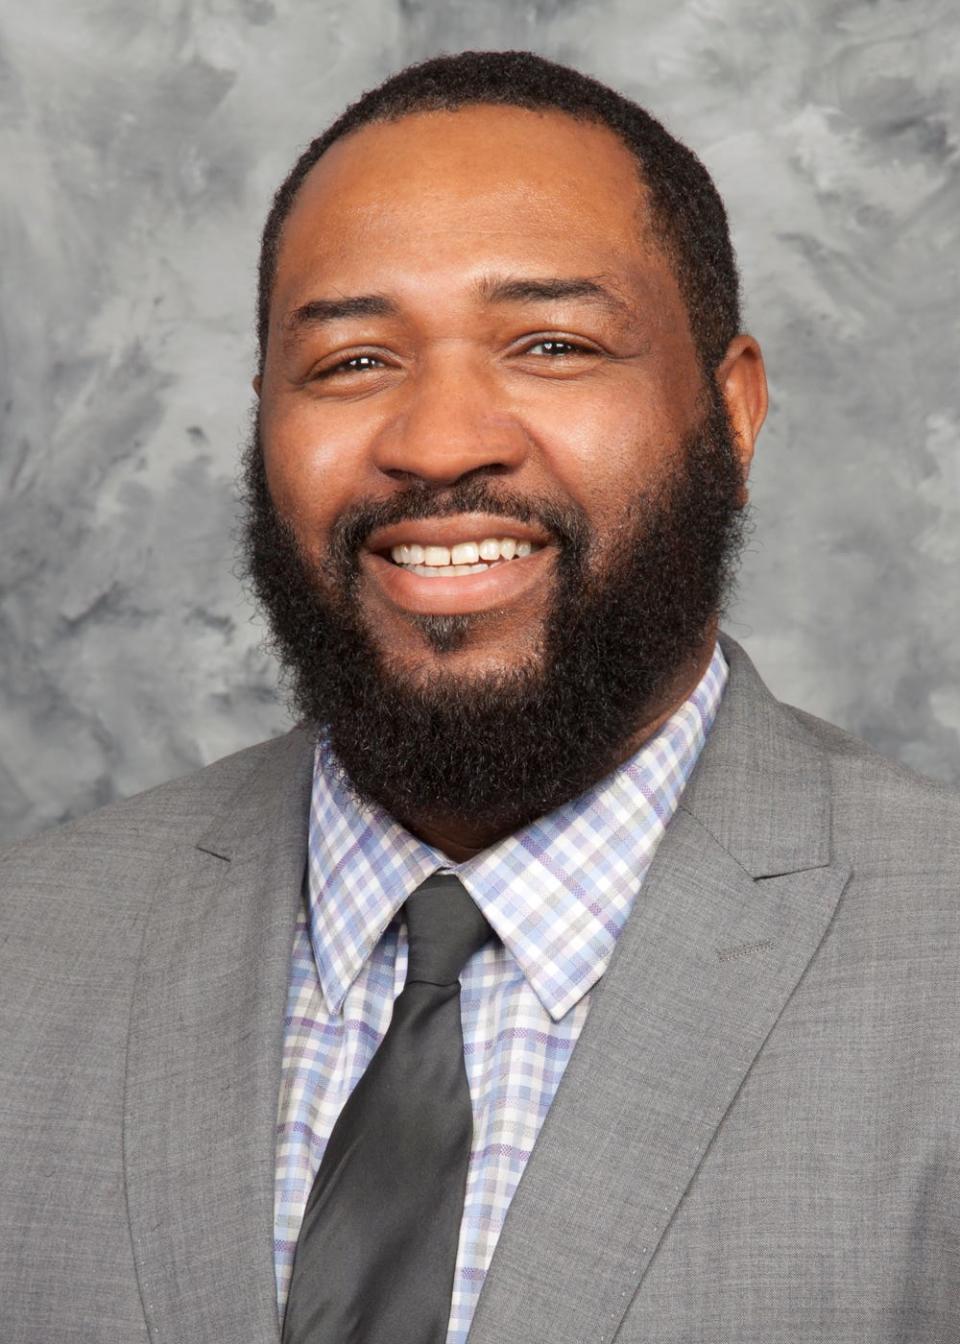 Demetrius Starling, who oversees Michigan's child welfare program, was one of three state leaders chosen to serve on the national advisory board of the American Bar Association's Stop Overreporting Our People project.